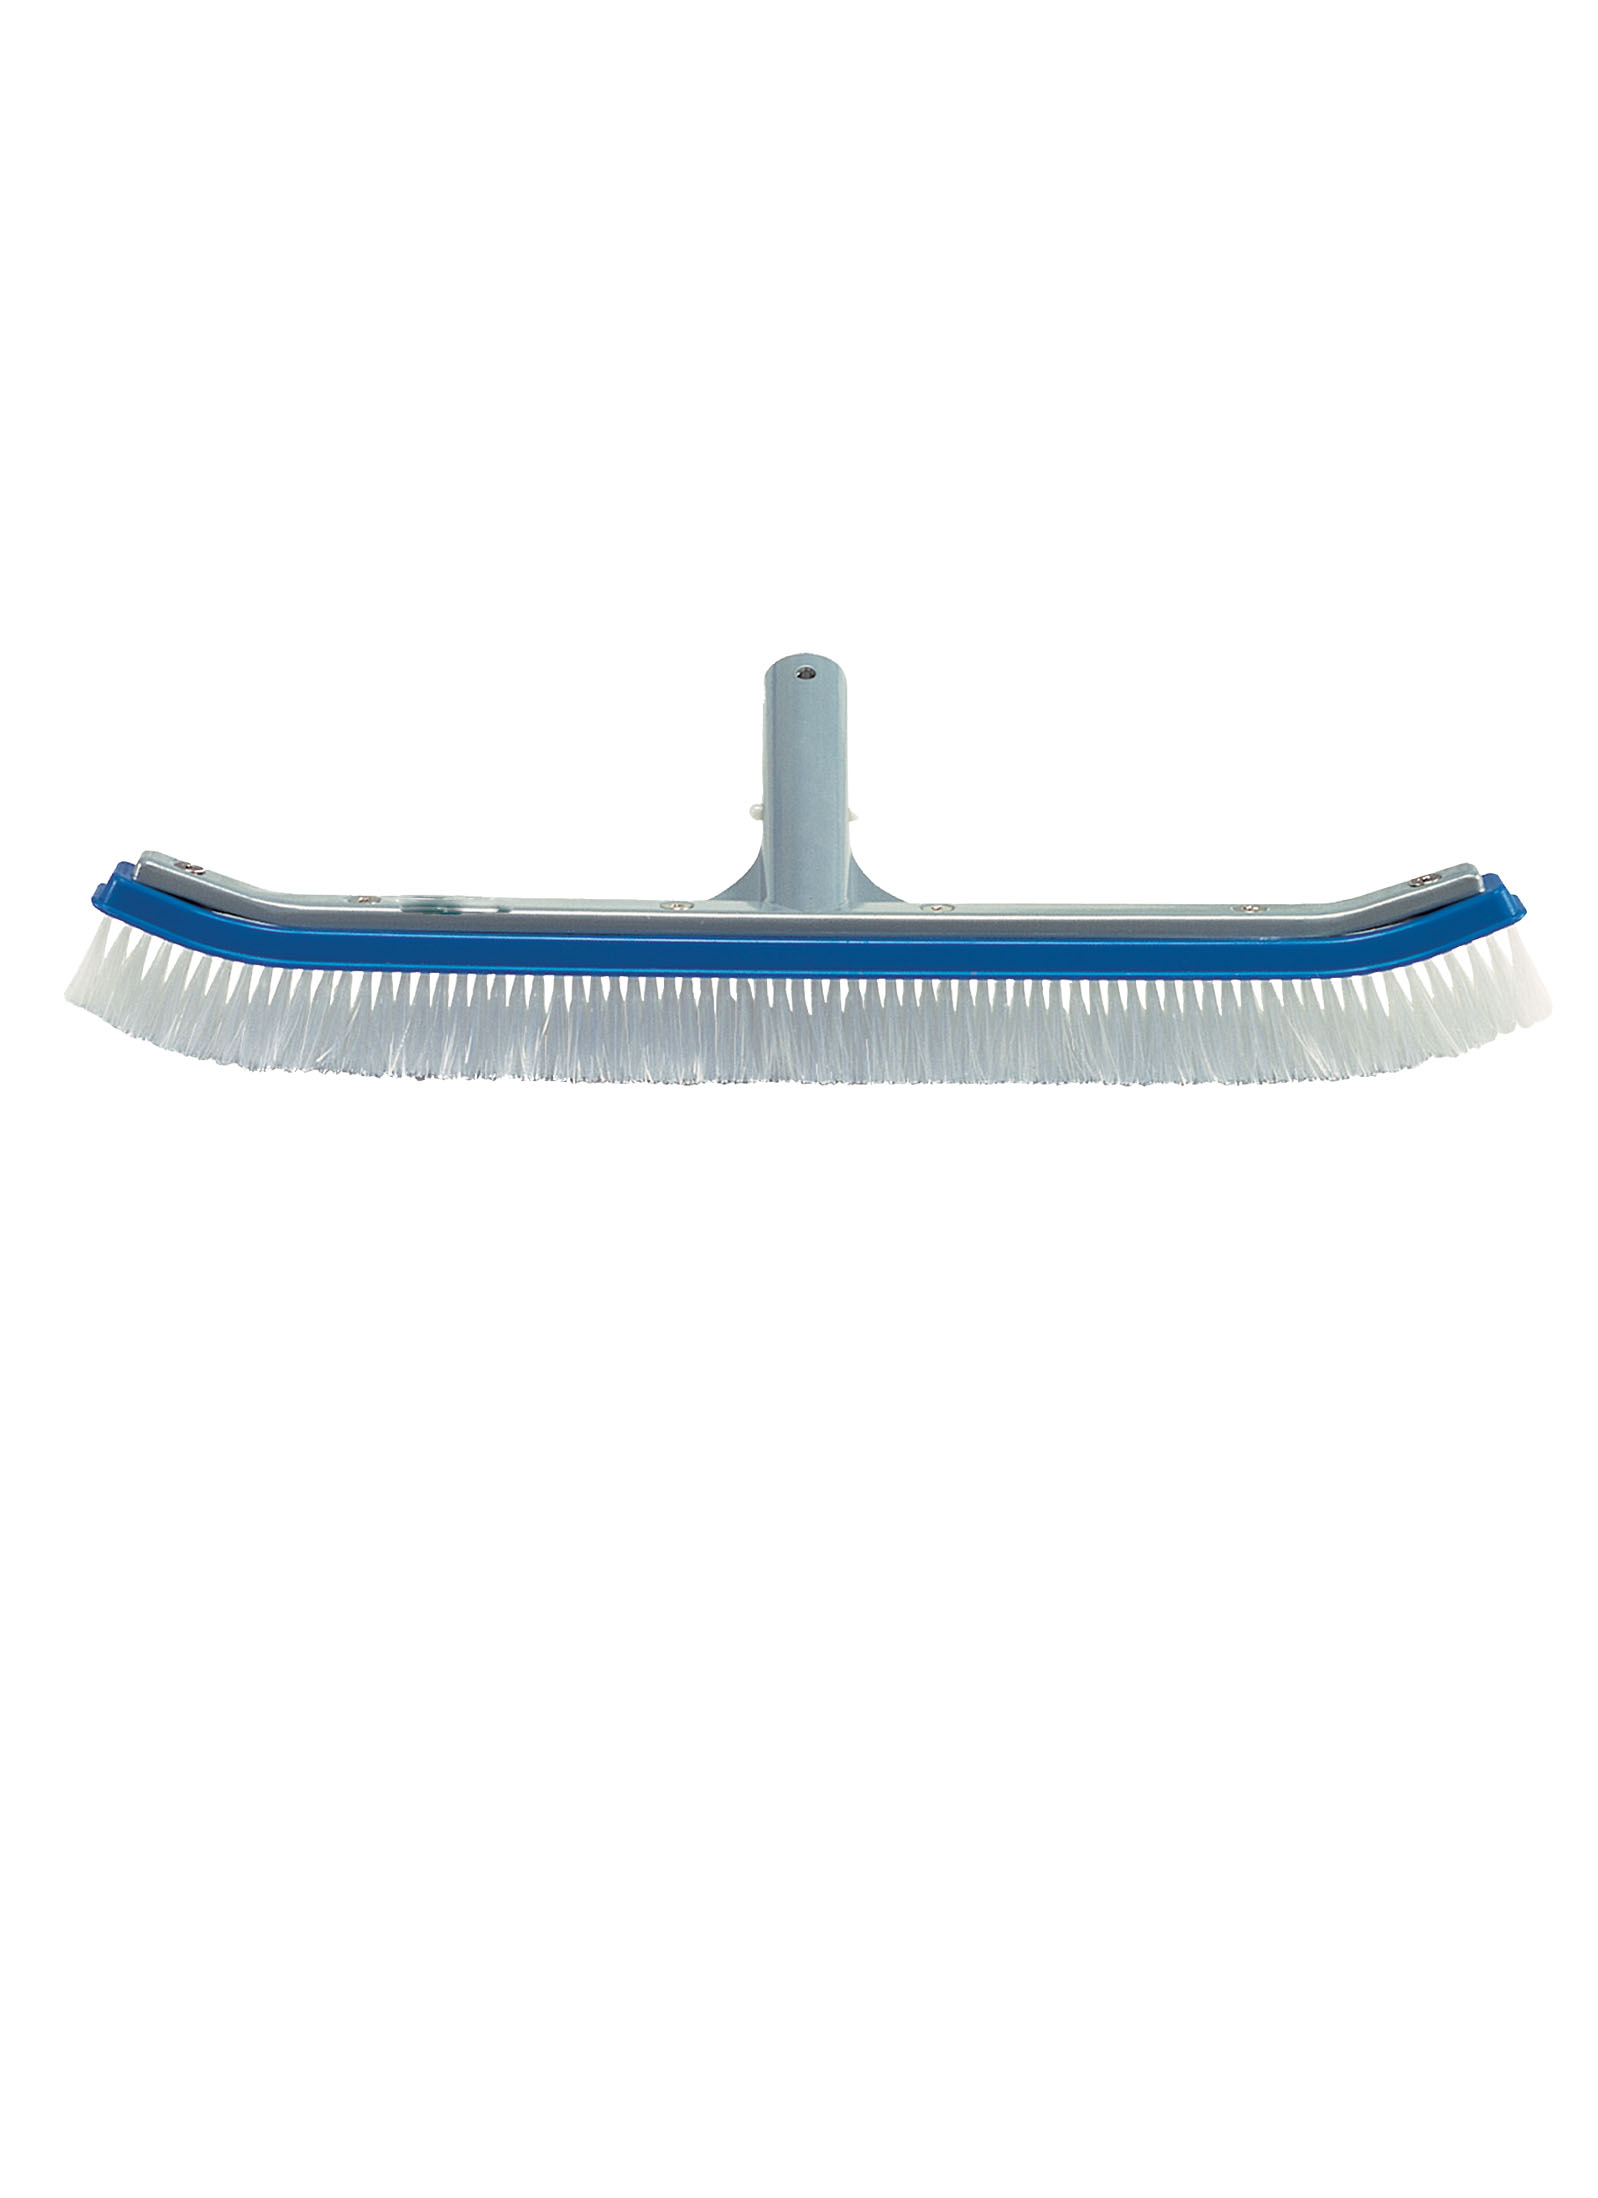 Wall Brush 18 In - Deluxe W/Alum Back - CLEARANCE SAFETY COVERS